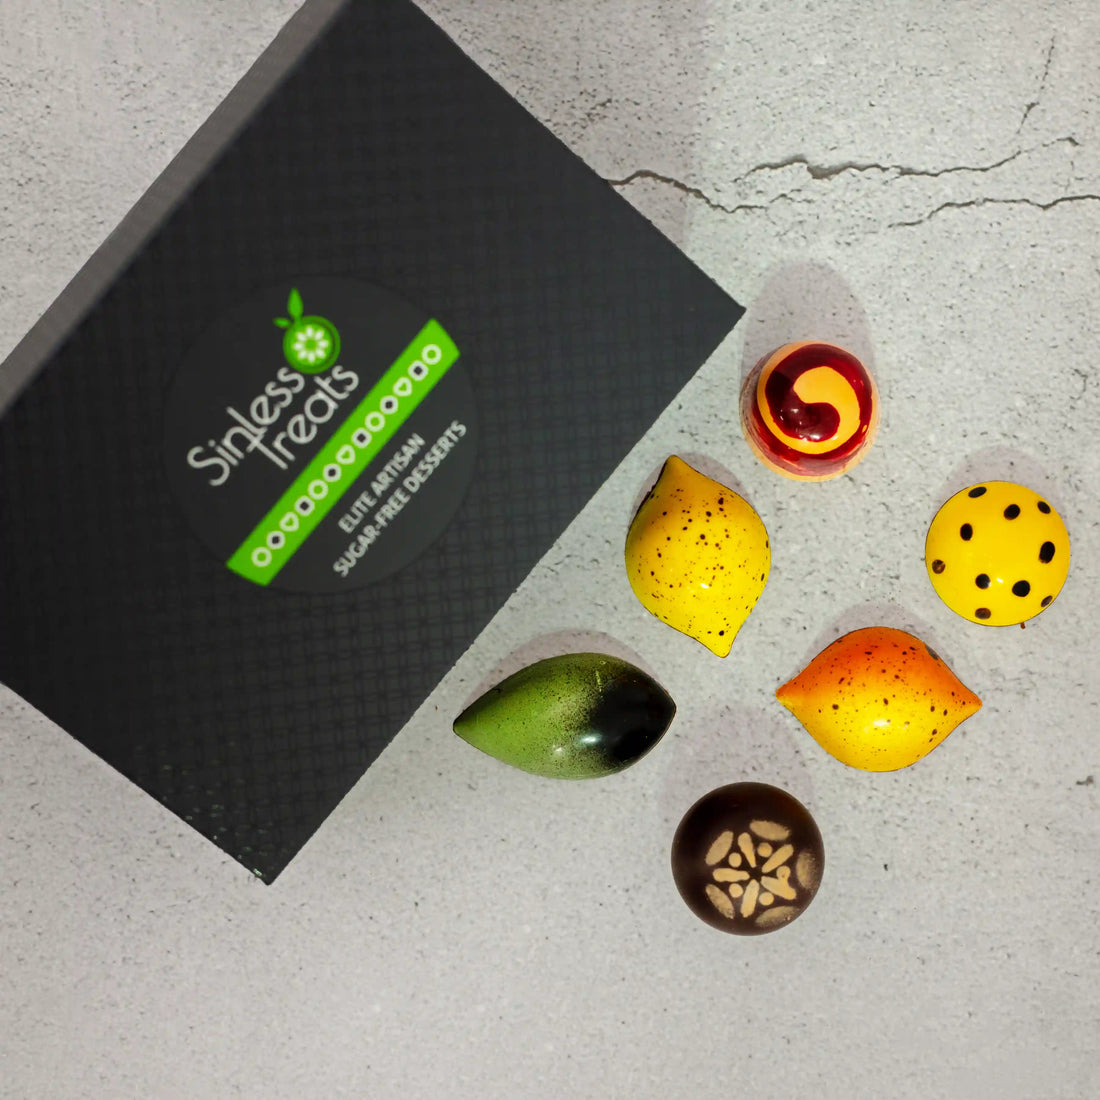 Fantasia Luxury chocolate gift box with 6 pieces of brightly painted citrus flavored chocolates